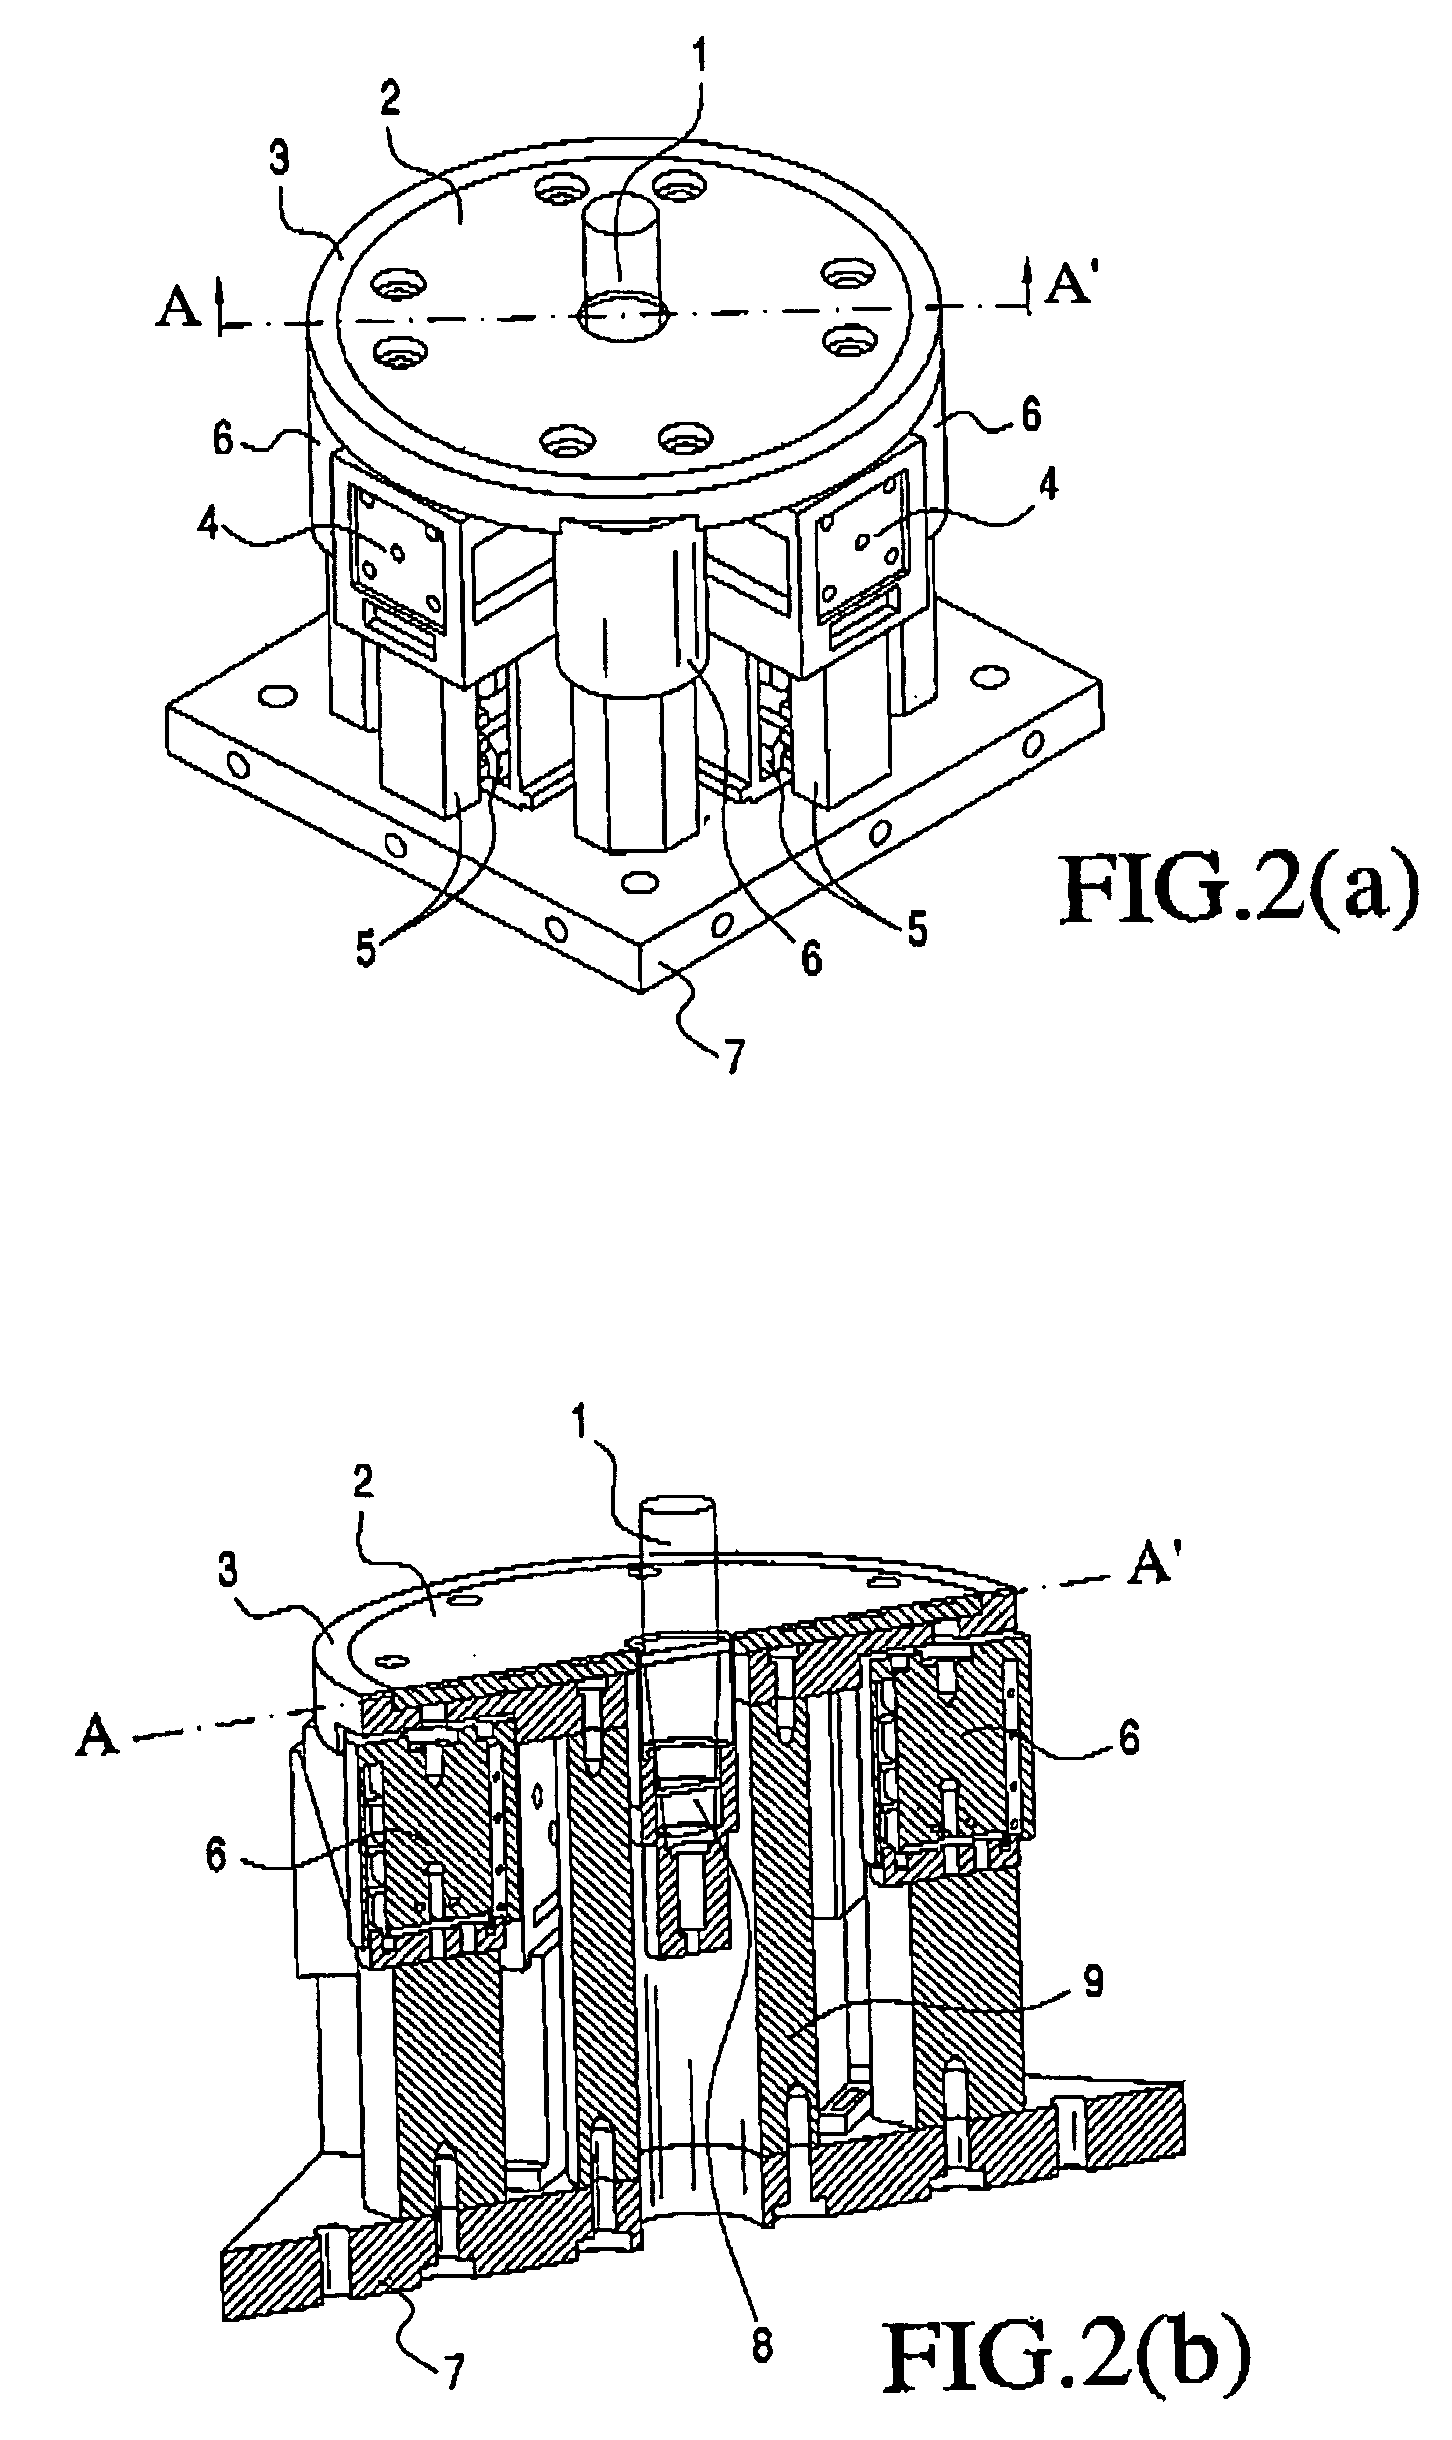 Optical inertial reference unit for kilohertz bandwidth submicroradian optical pointing and jitter control